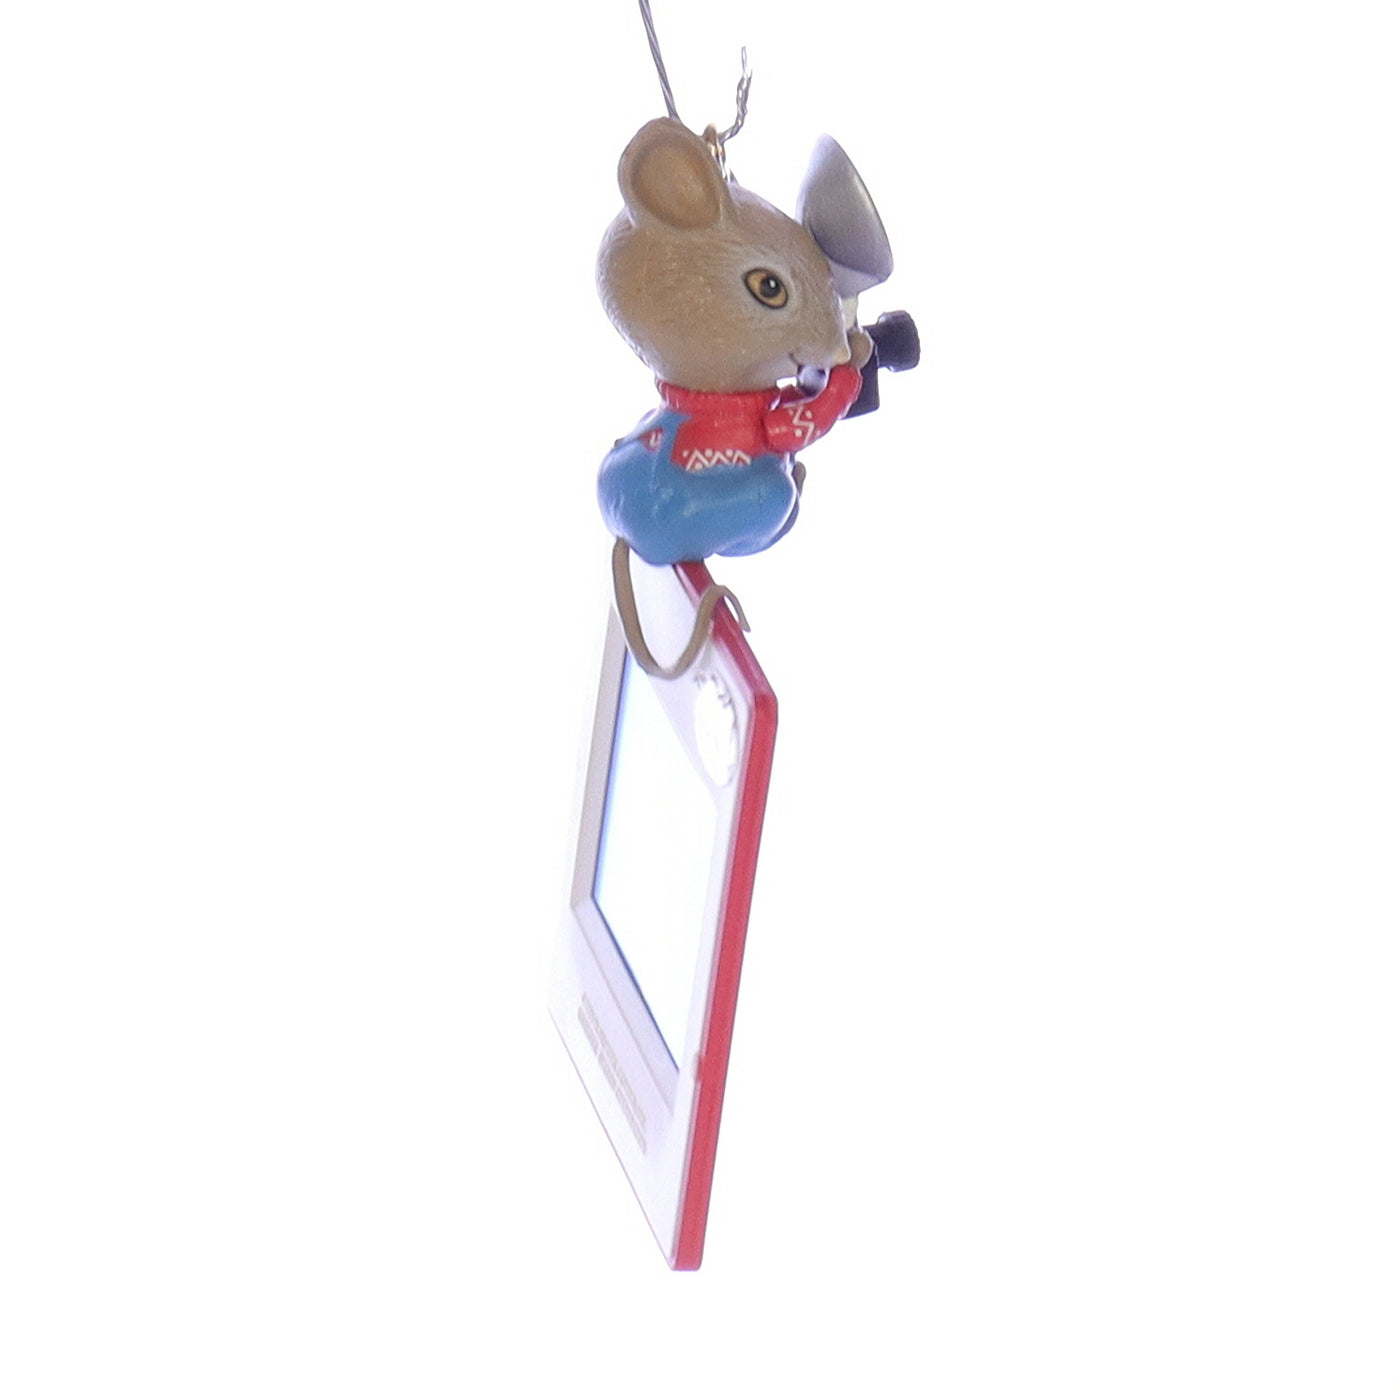 Enesco_Treasury_of_Christmas_Ornaments_830046_Caught_in_the_Act_Mouse_Ornament_1991 Back Right View